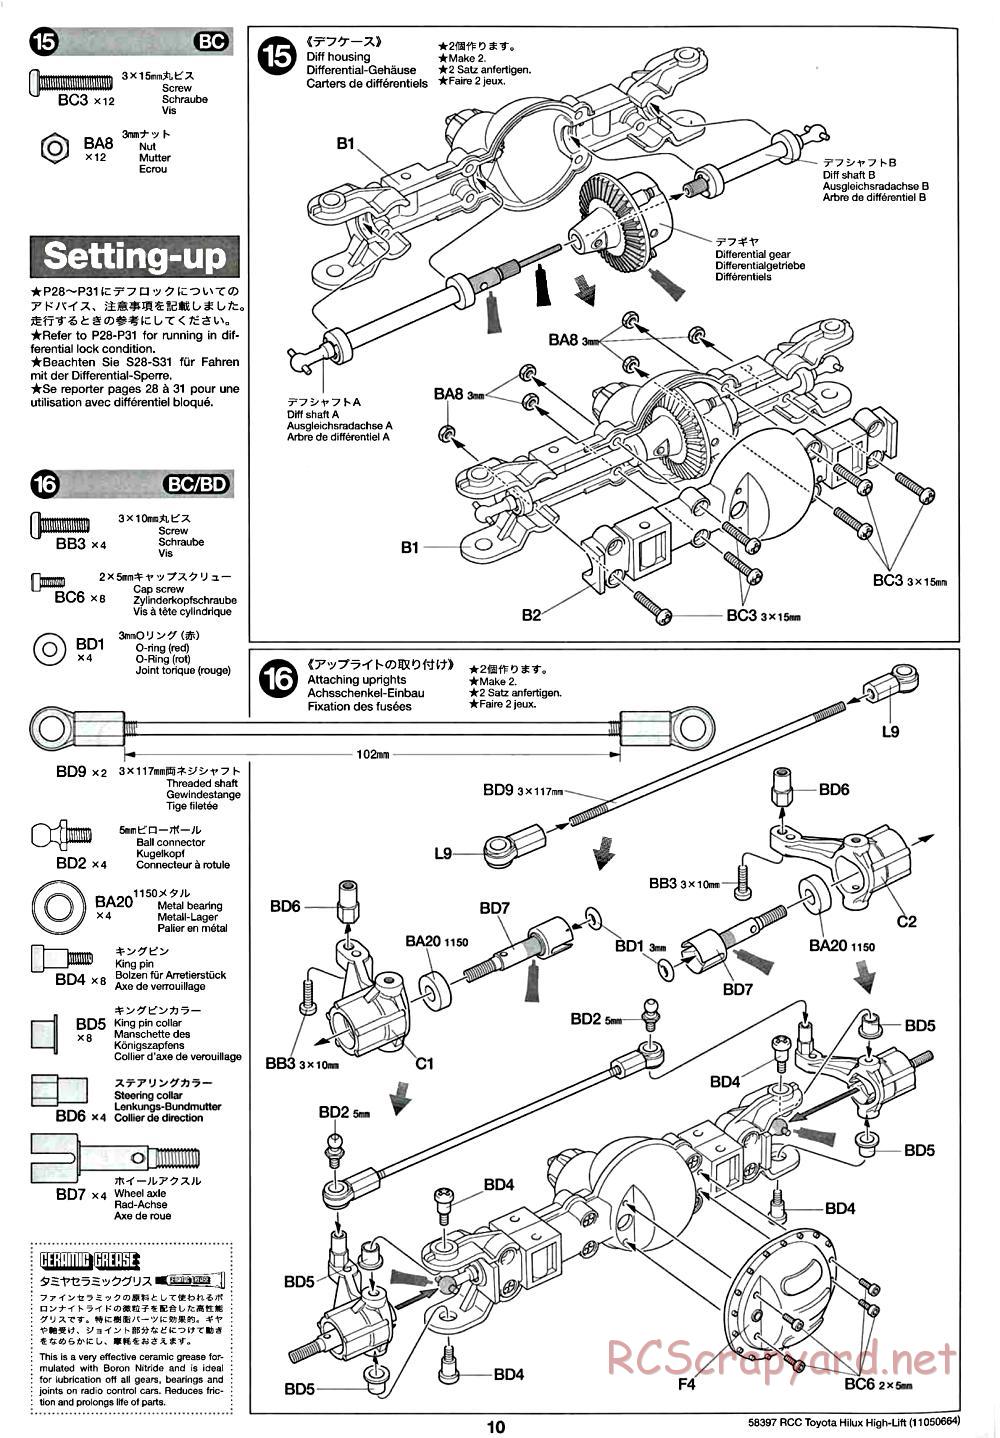 Tamiya - Toyota Hilux High-Lift Chassis - Manual - Page 10